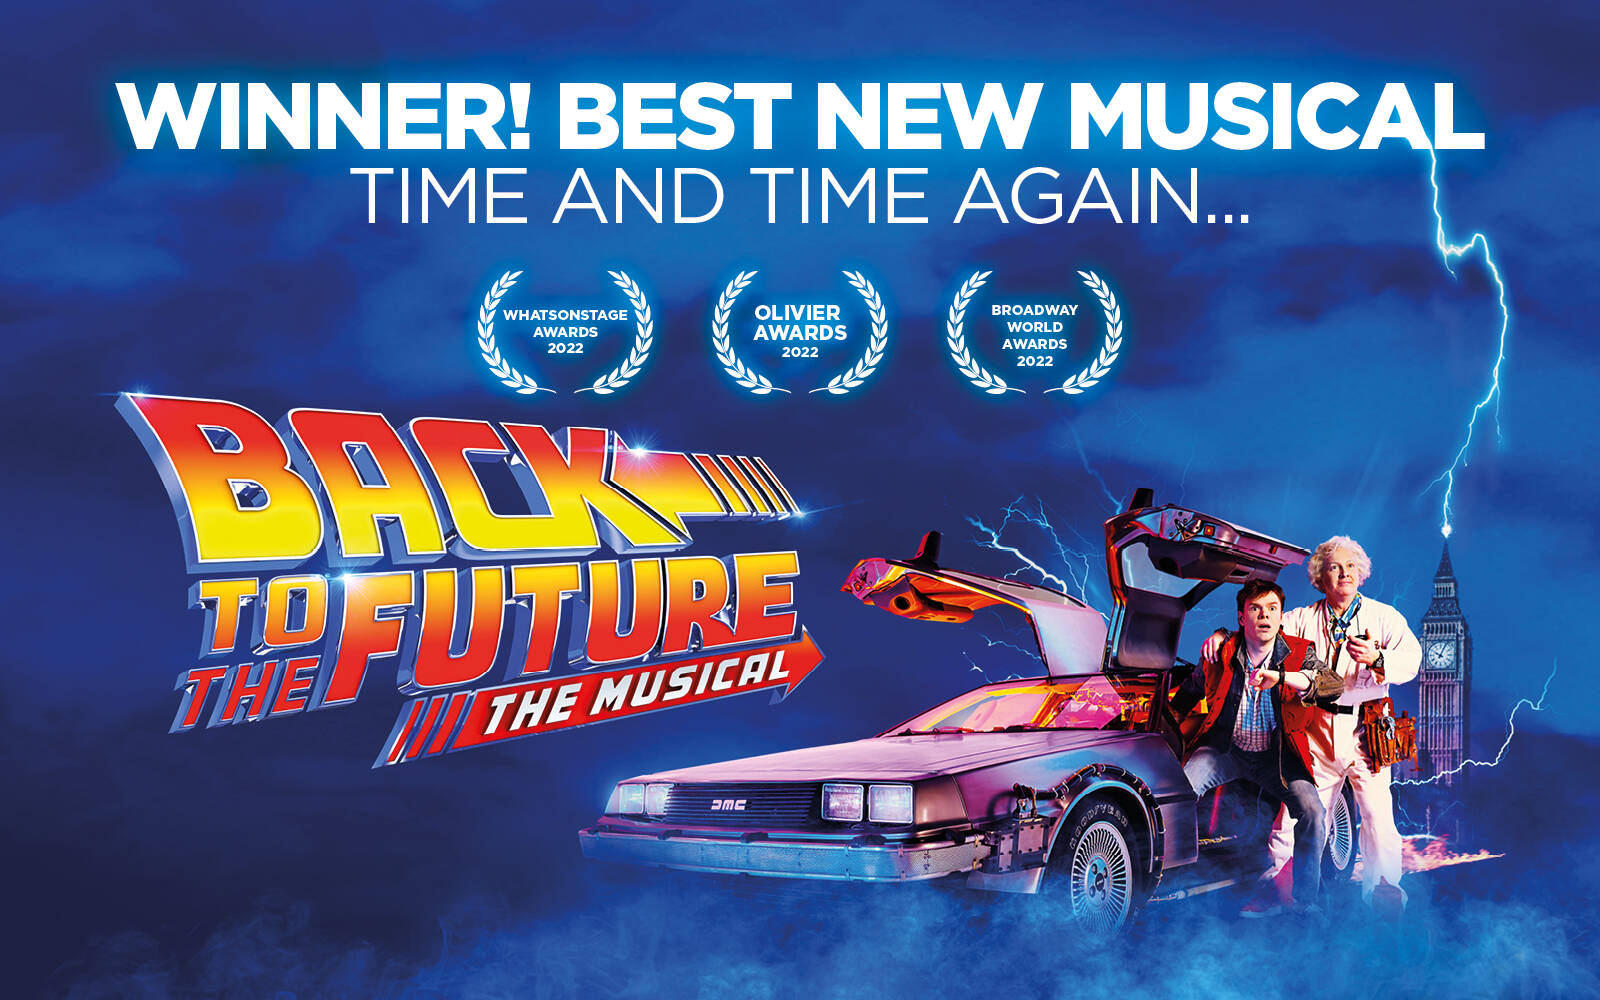 Back to the Future' Musical on Broadway Finds Its Marty McFly